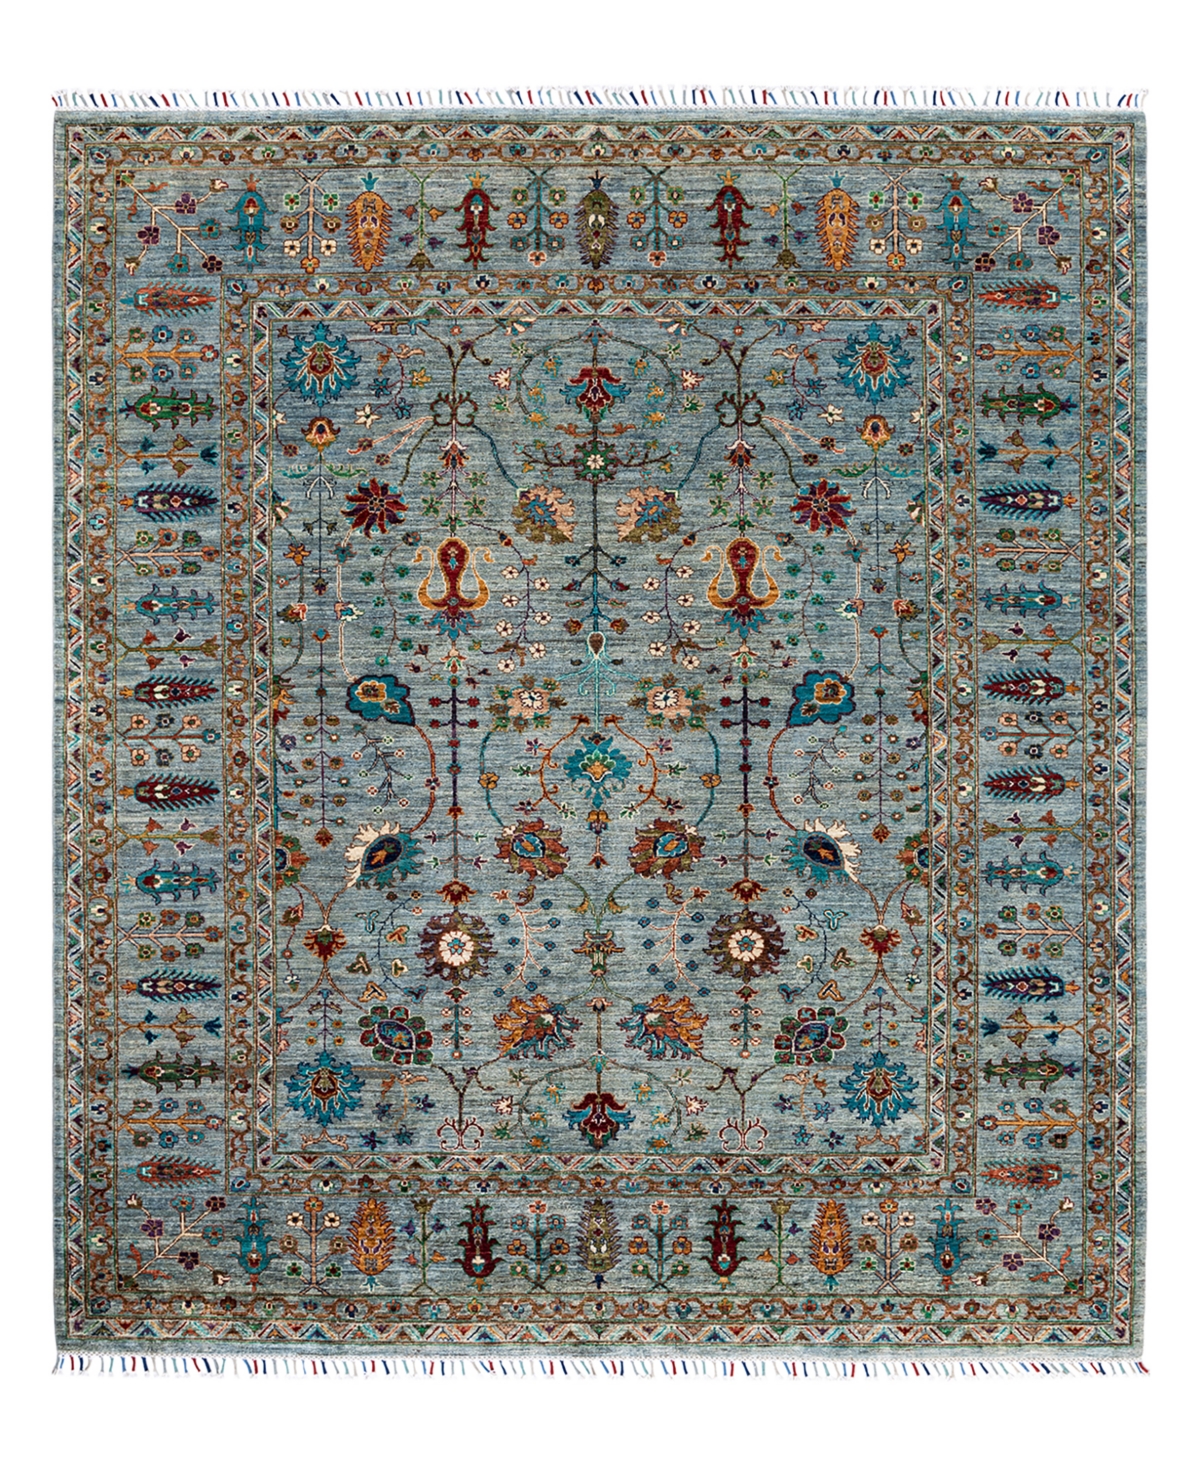 Adorn Hand Woven Rugs Tribal M1982 8'3" X 9'10" Area Rug In Mist